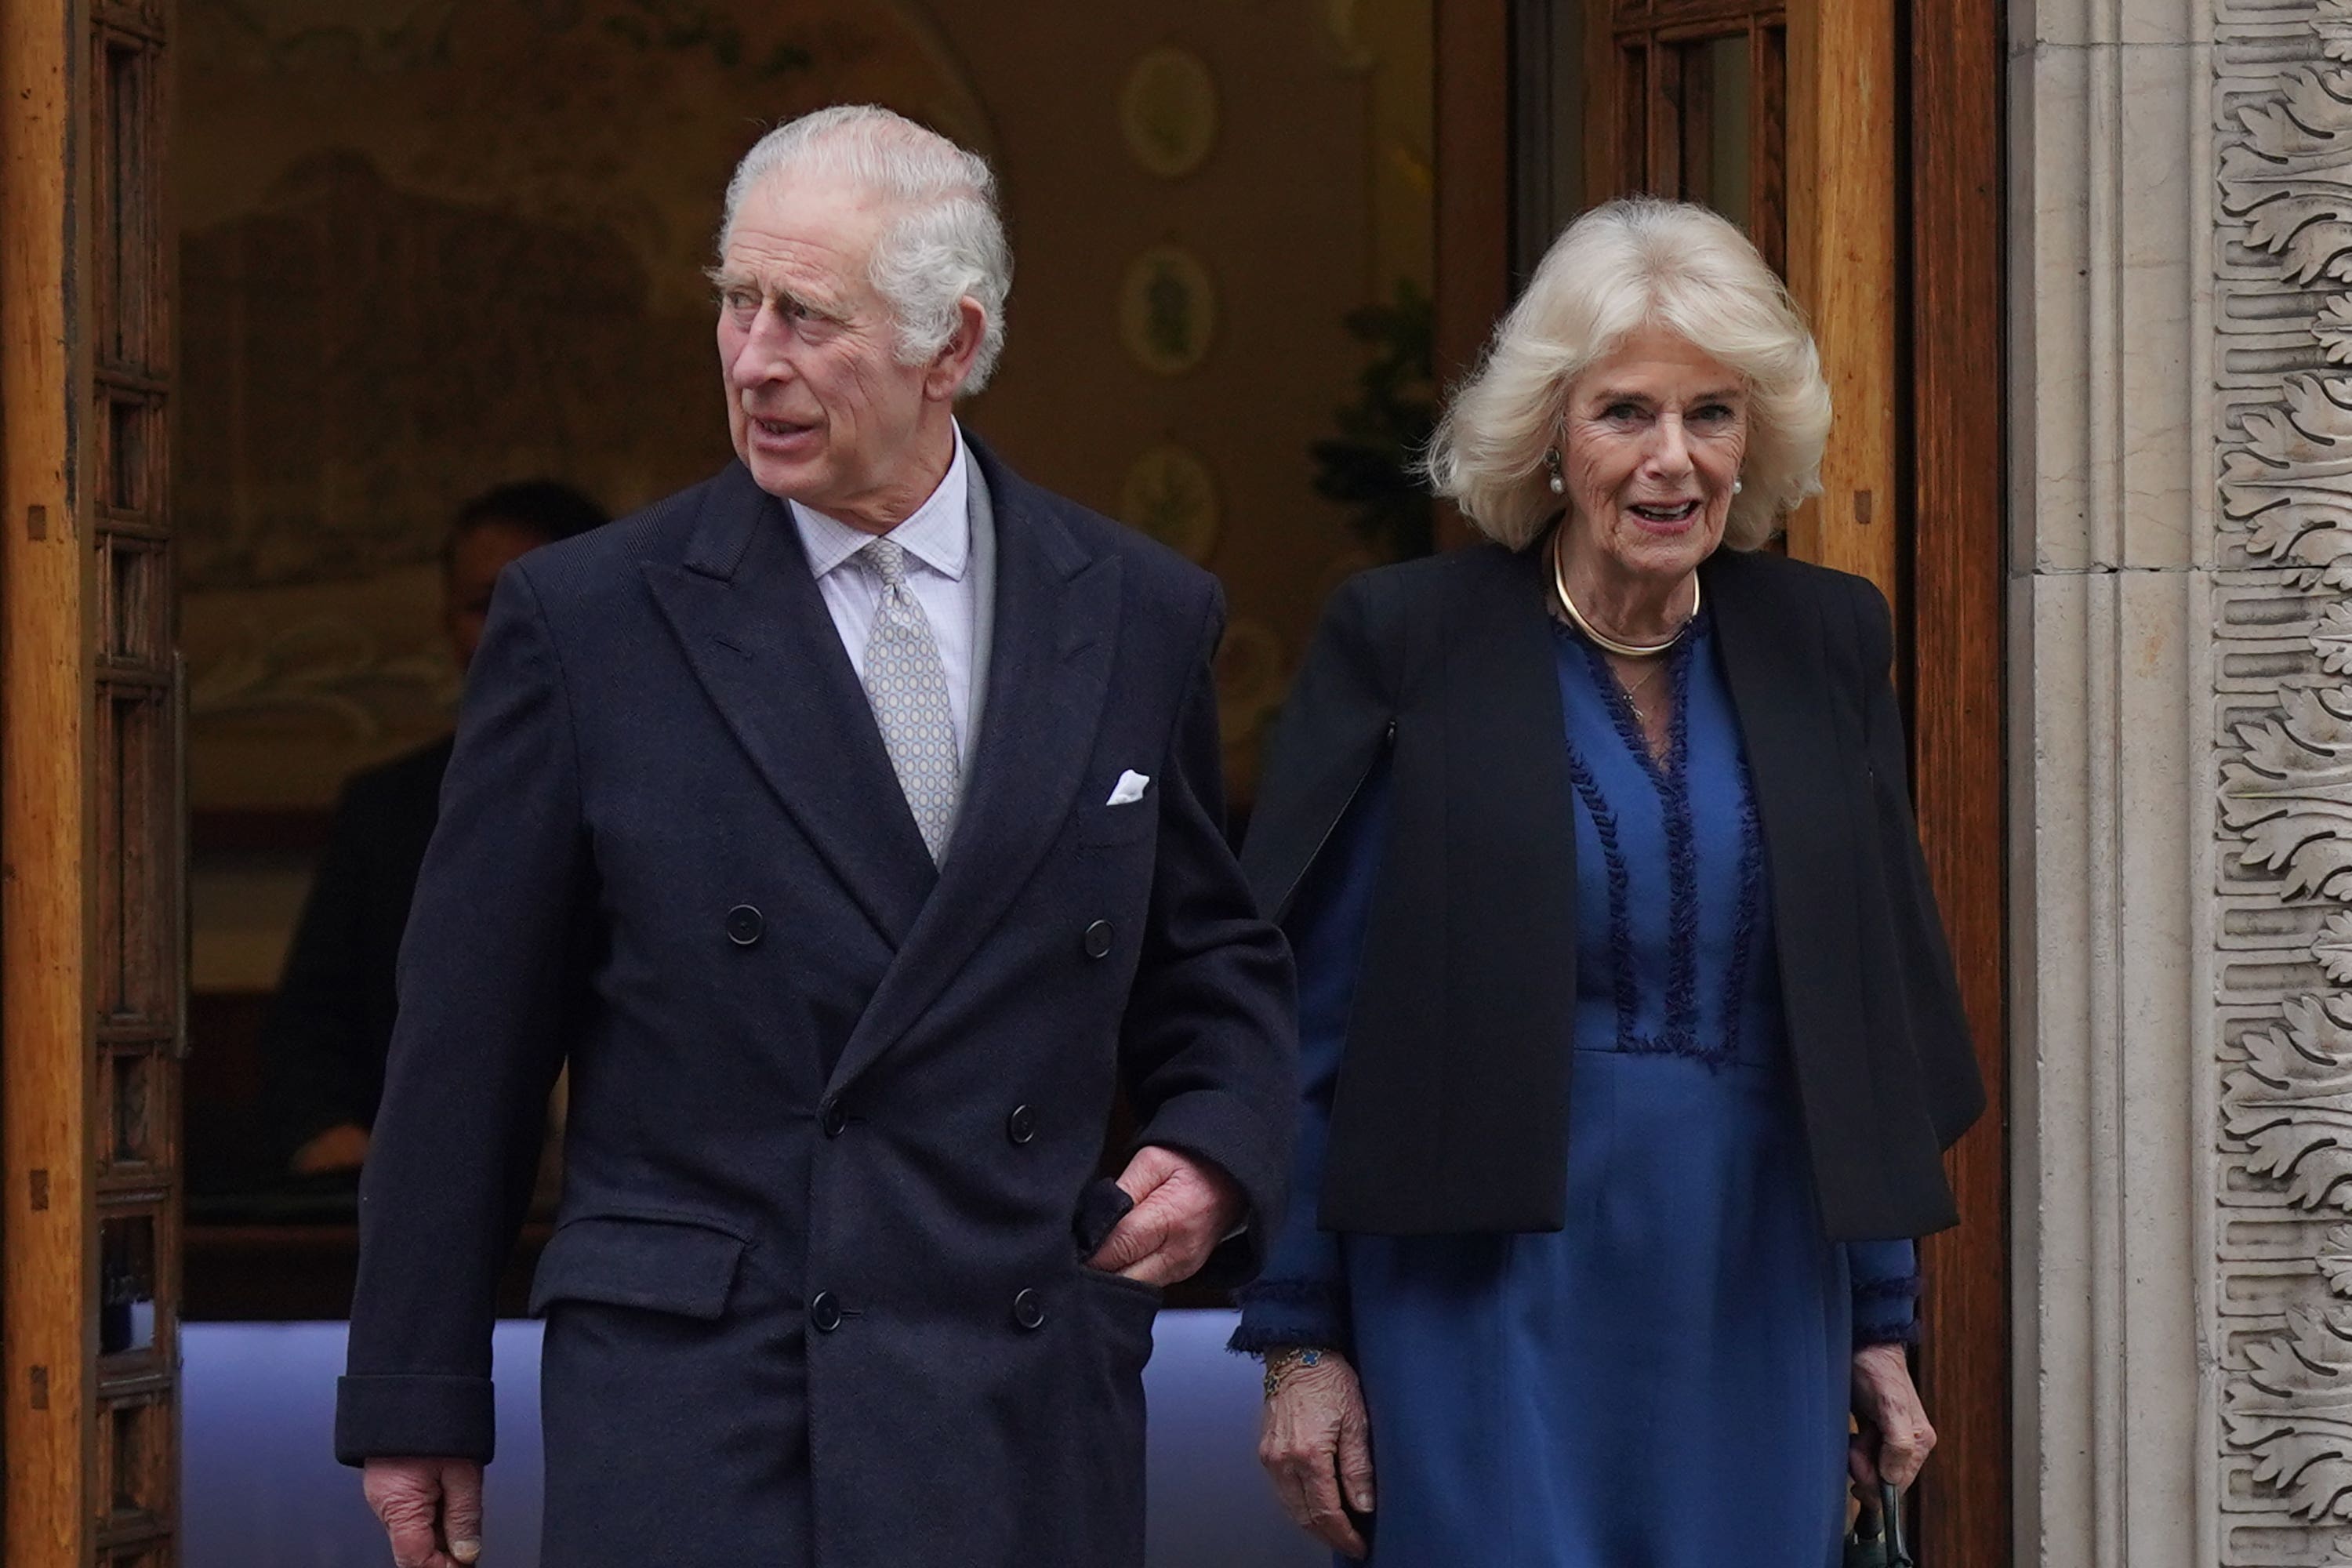 Camilla accompanying Charles as he leaves the London Clinic after undergoing treatment for an enlarged prostate (Lucy North/PA)